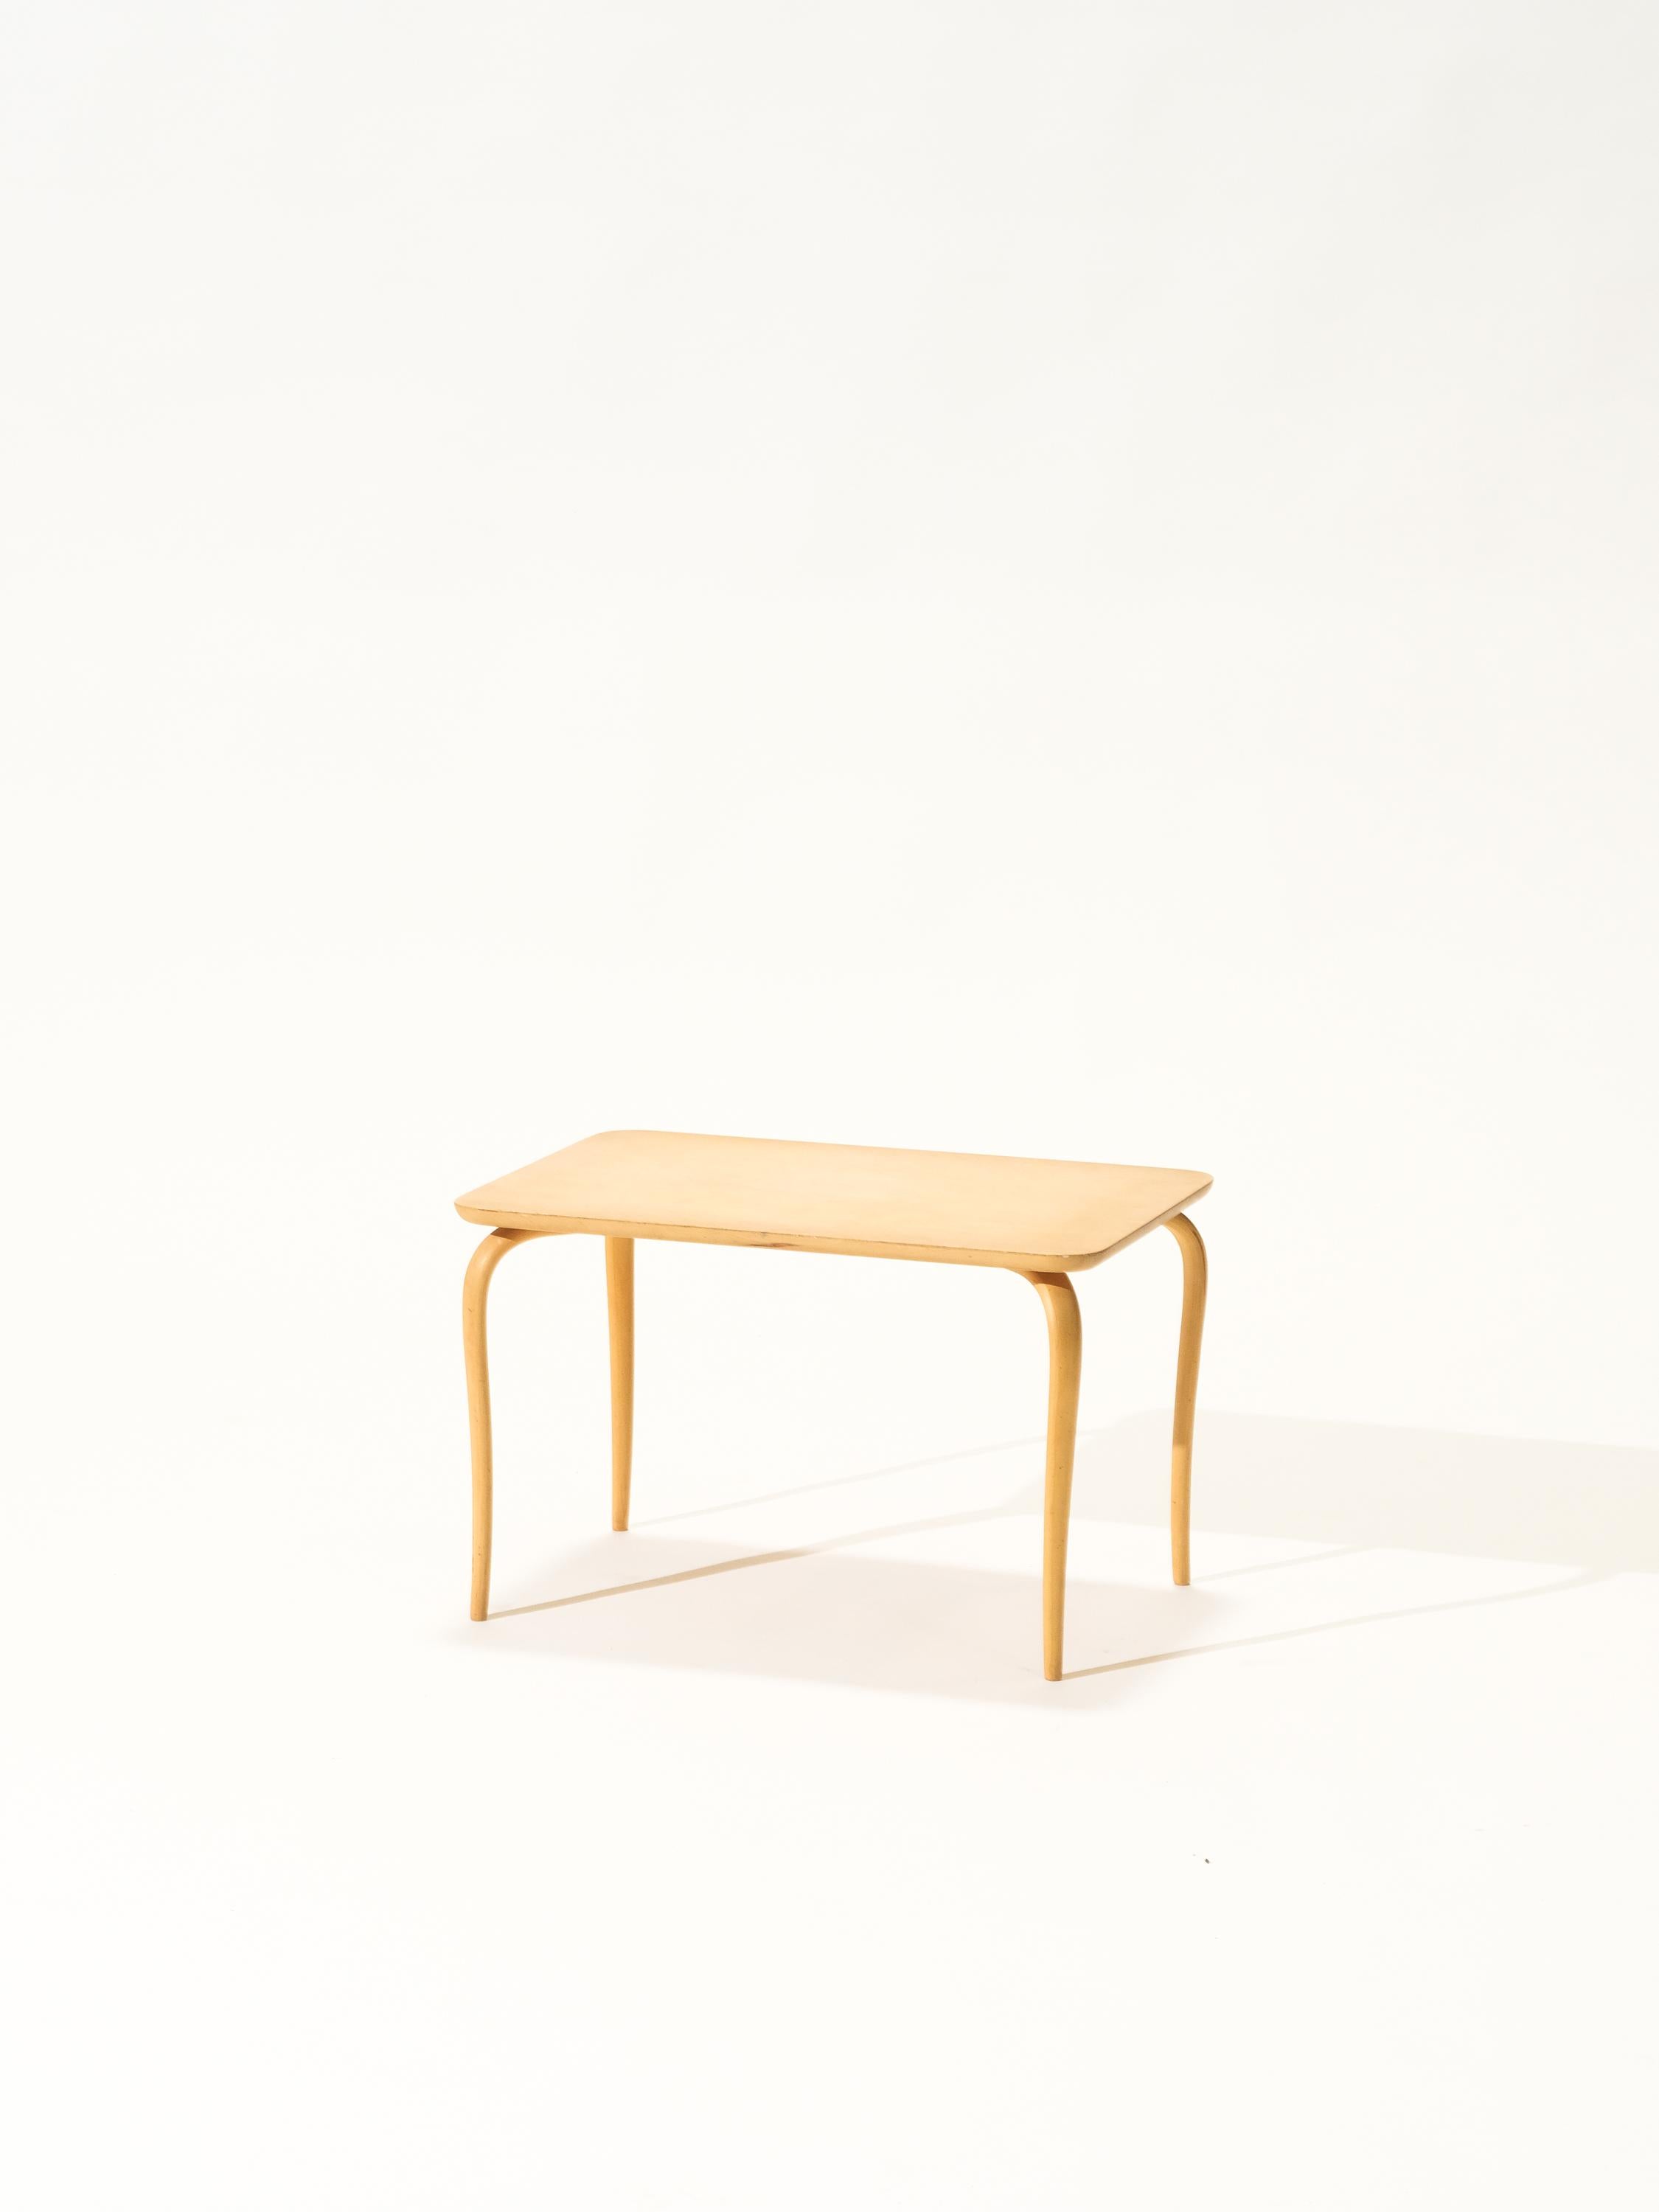 Bruno Mathsson coffee table model 'Annika'. This coffee table has birch plywood legs, which are fluently curved and tapered. These light legs are elegantly built and give this piece its unique appearance. Simple yet very graceful.